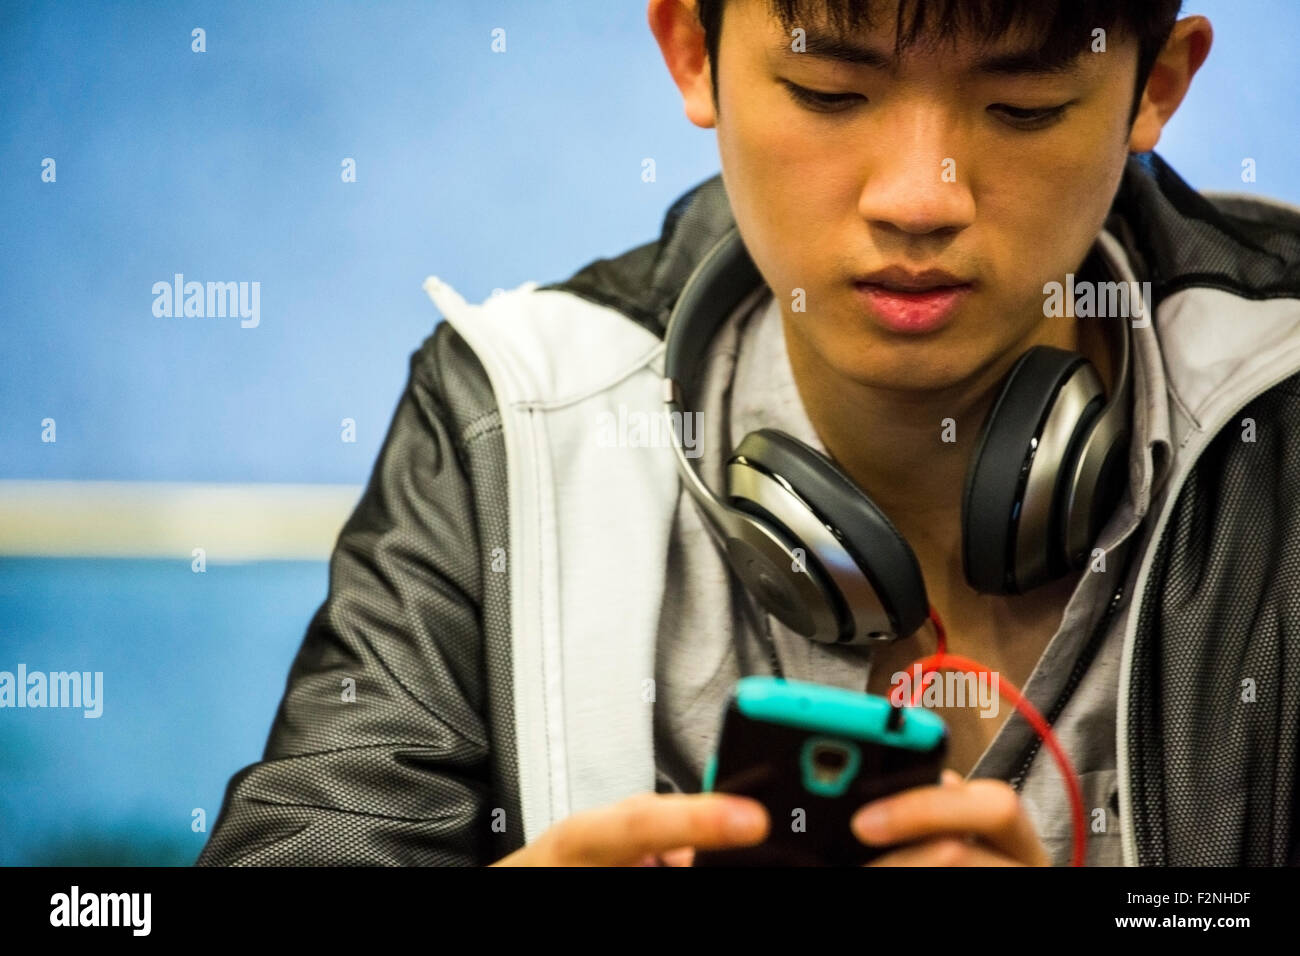 Asian man with headphone using cell phone Stock Photo